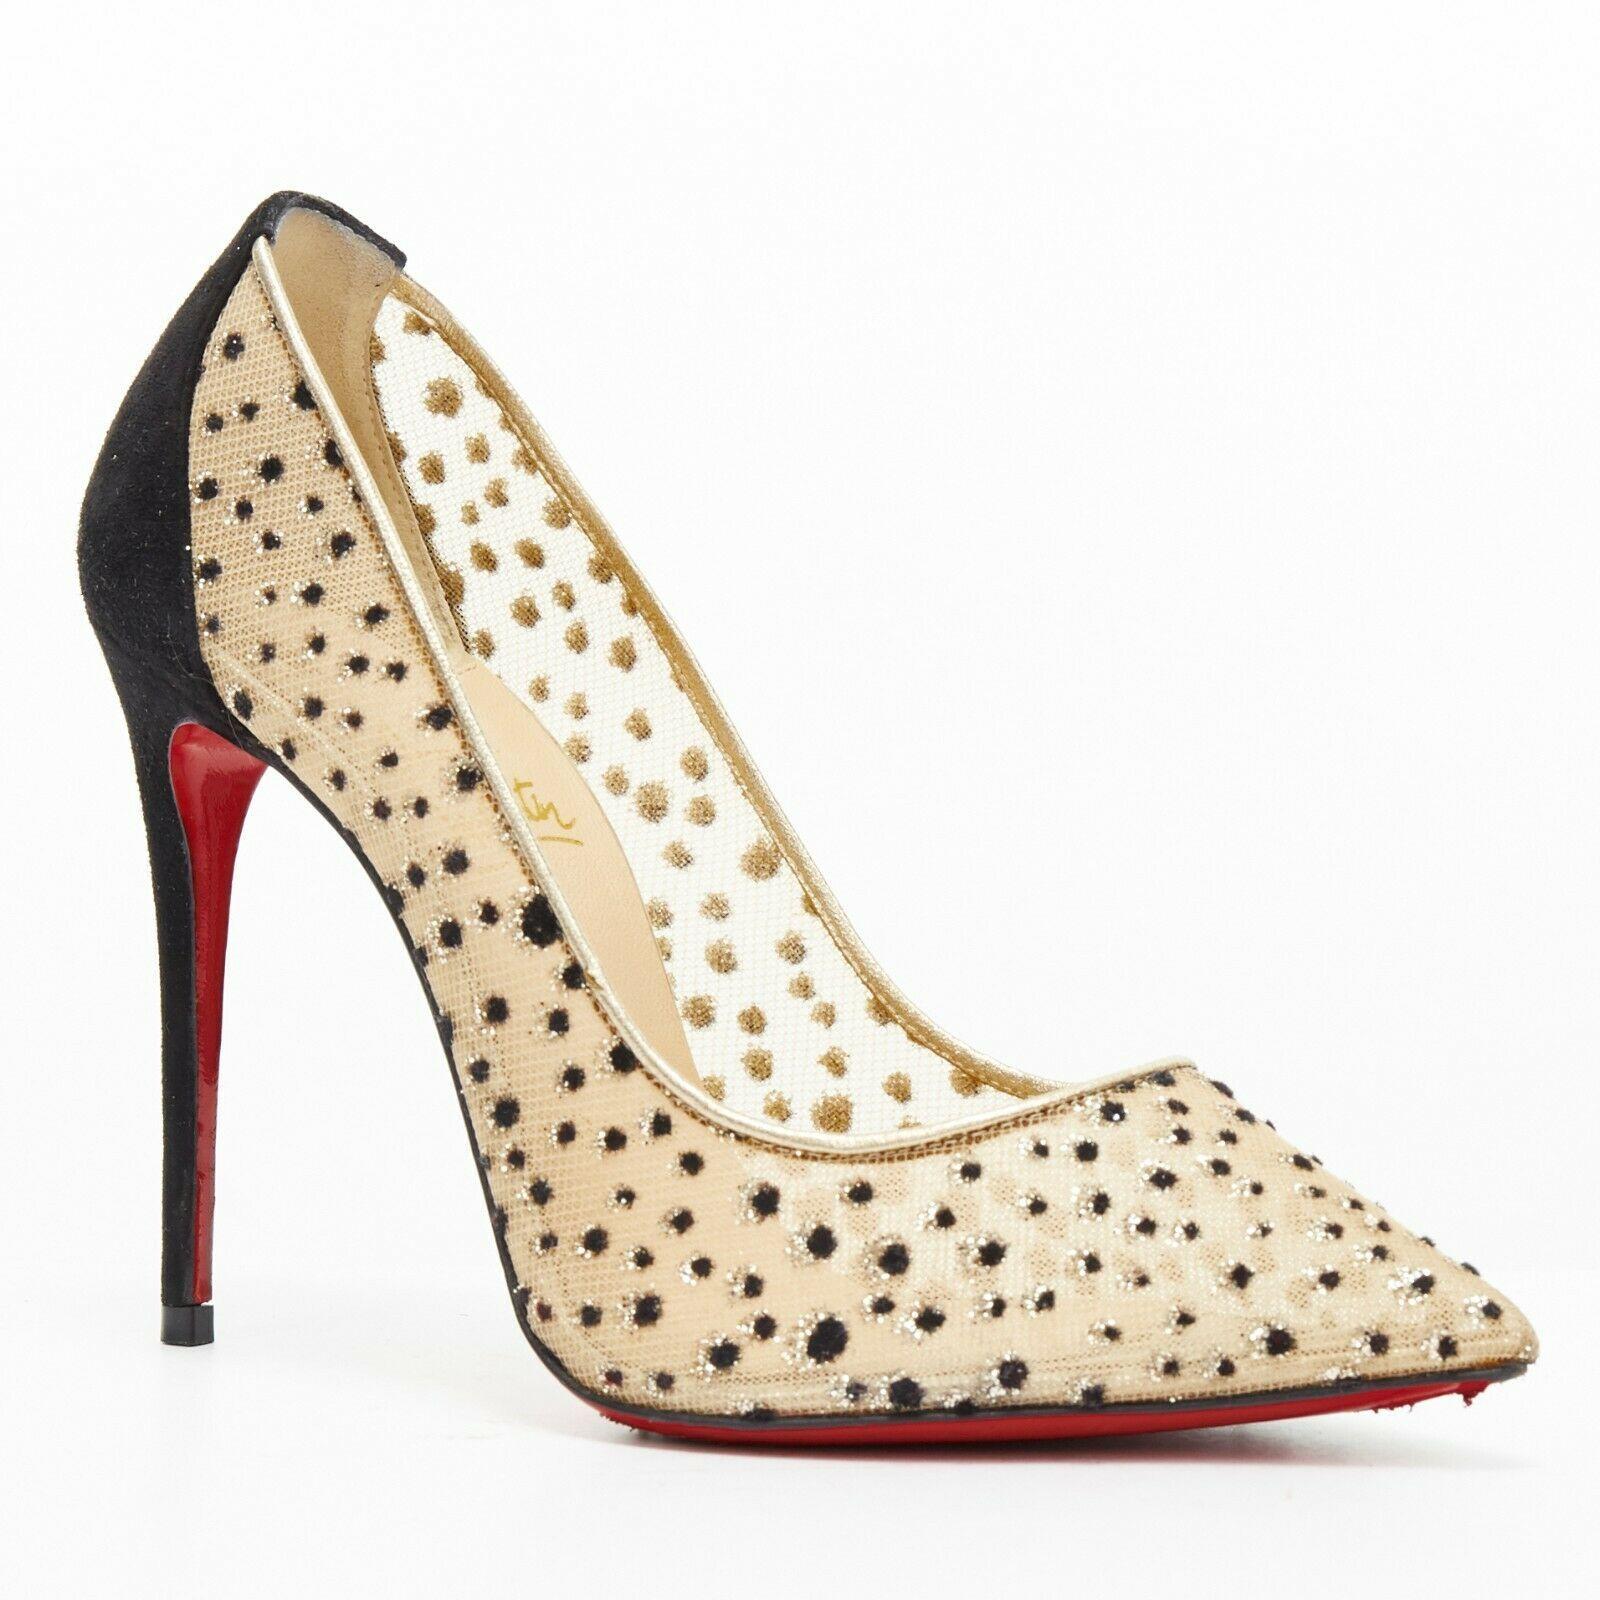 CHRISTIAN LOUBOUTIN Follies Lace 100 nude mesh black glitter speckle pump EU36.5
CHRISTIAN LOUBOUTIN
Follies Lace 100. Nude mesh upper. Black speckle spot velvet and gold glitter detail. 
Pointed toe. Gold leather piping around opening. Black suede